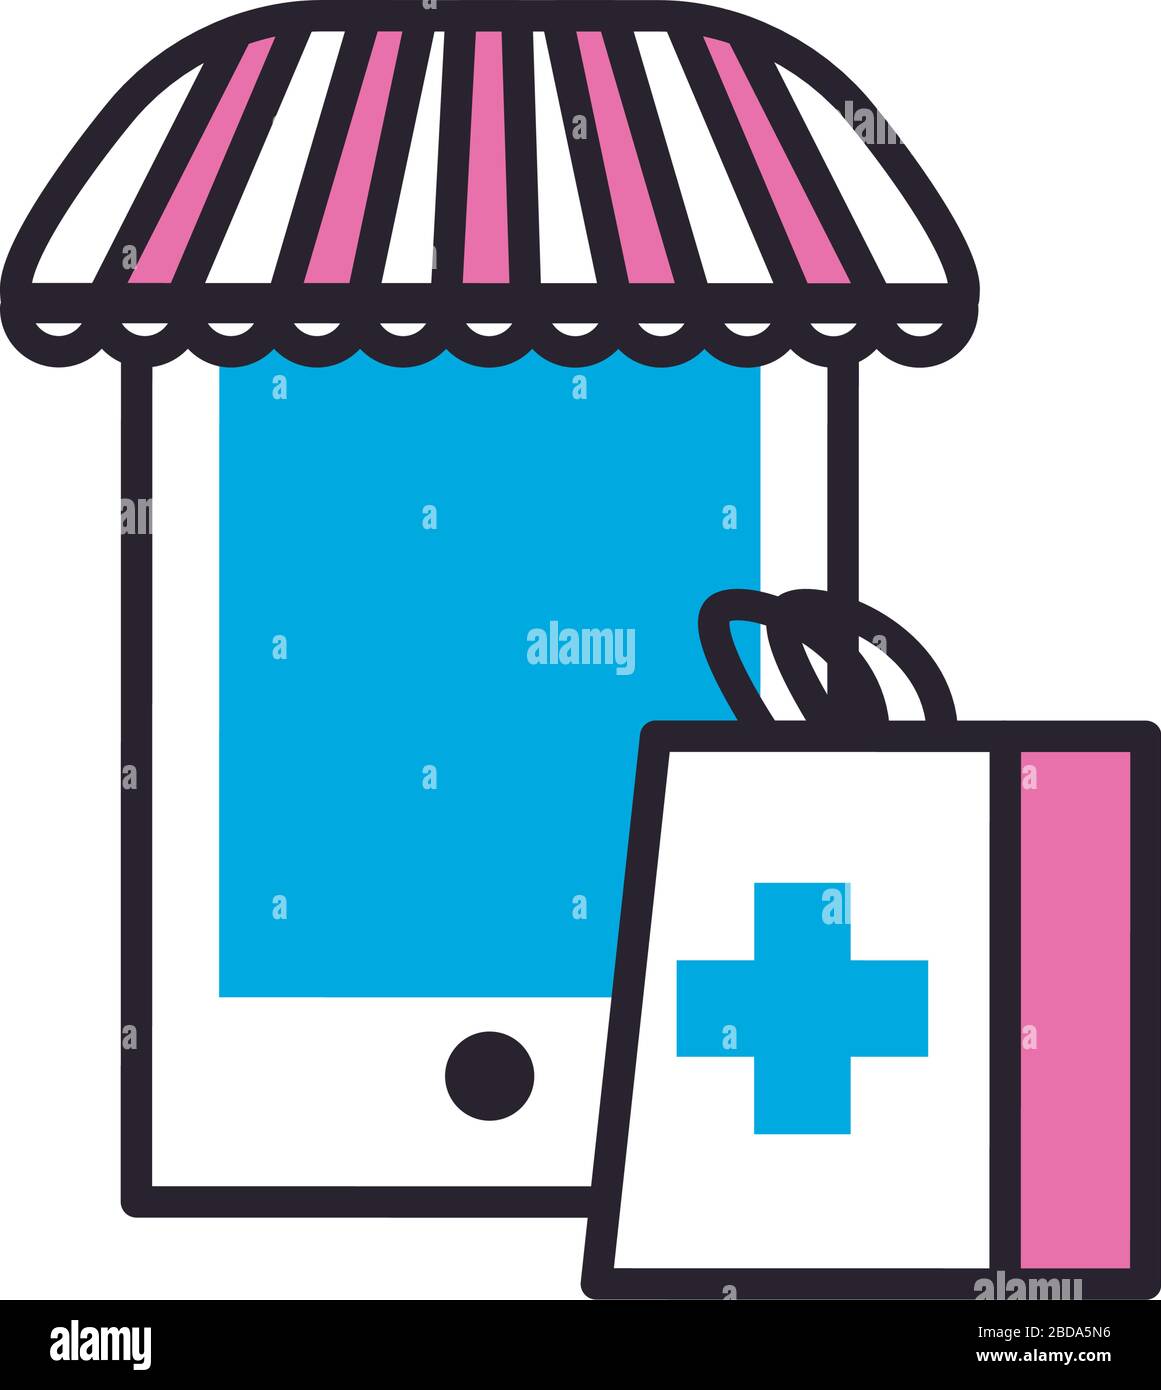 Smartphone with tent and medical bag fill style icon design of Shopping online ecommerce market retail buy paying banking and consumerism theme Vector illustration Stock Vector